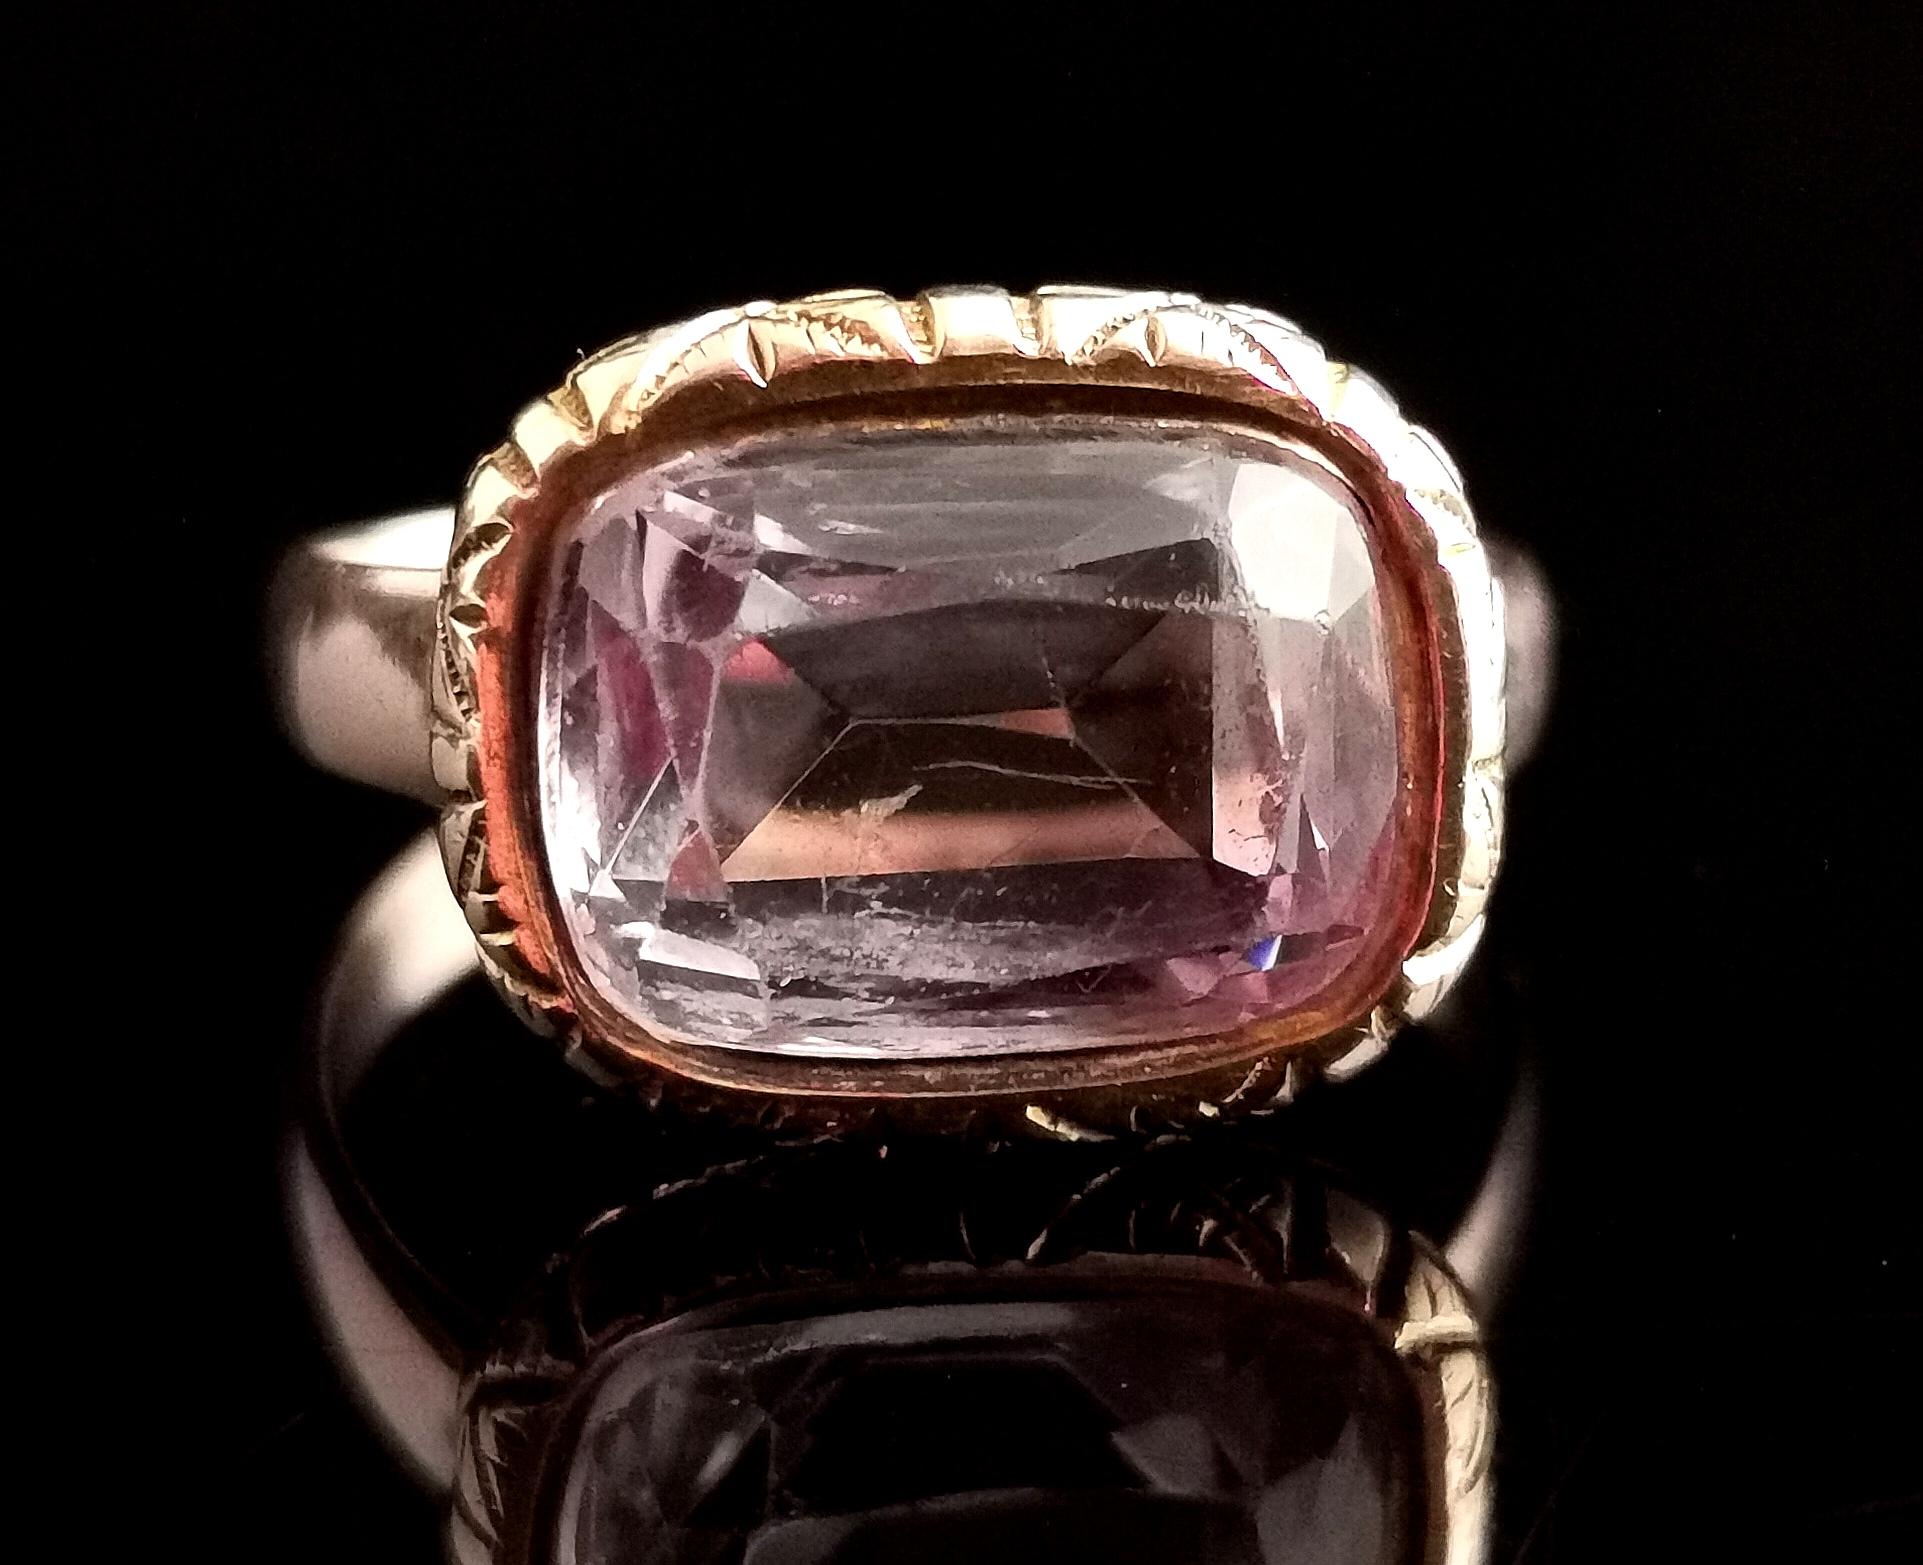 An attractive and unusual antique 9kt gold and Amethyst seal ring.

It is a conversion piece, the beautiful central cushion cut Amethyst taking centre stage in the chased and engraved gold bezel setting.

A good sized stone with a light yet rich